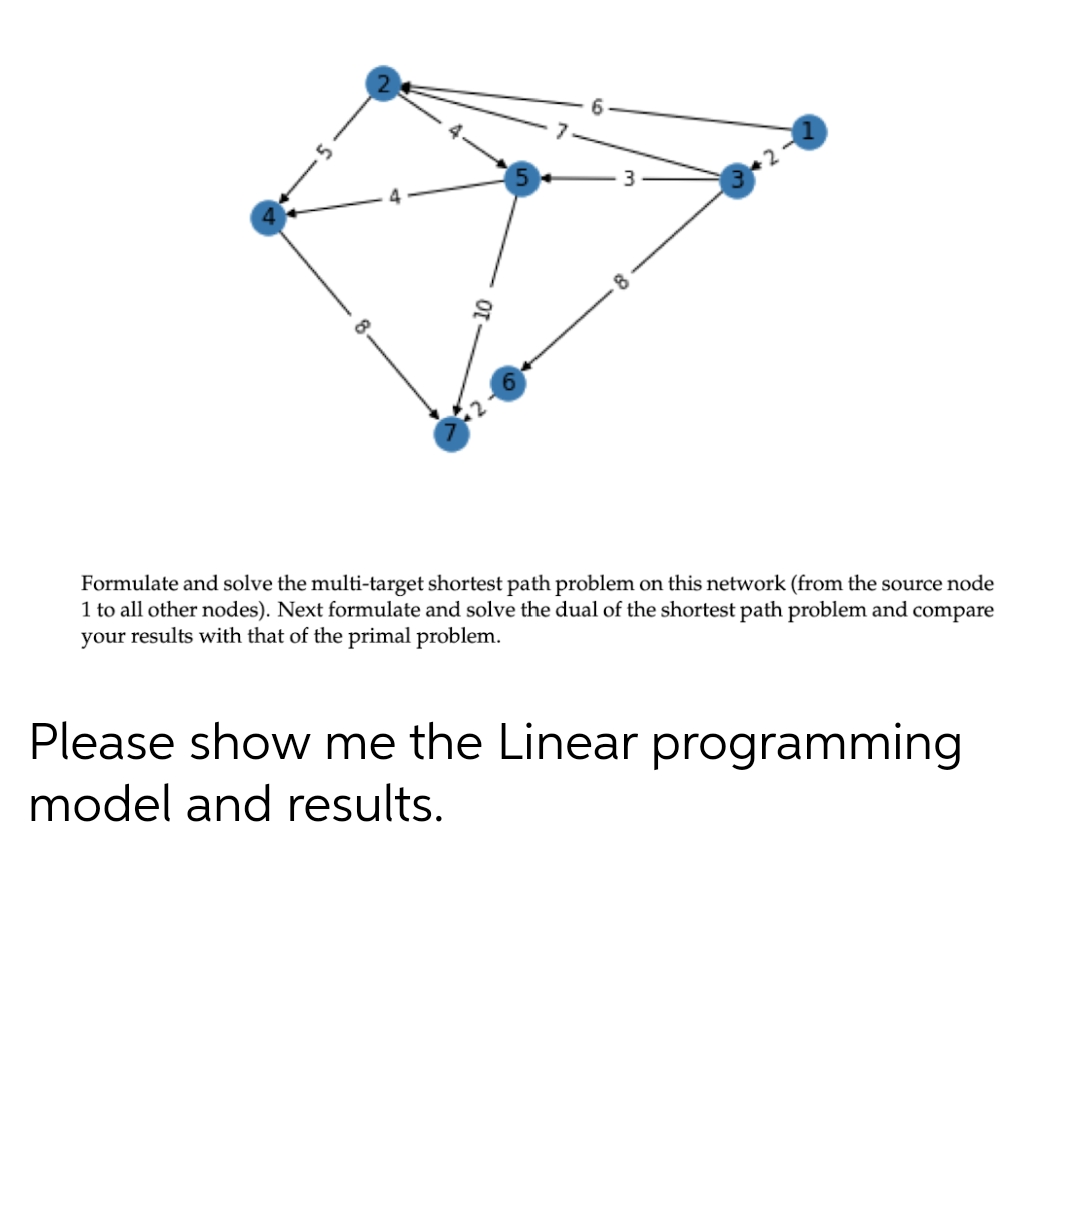 Formulate and solve the multi-target shortest path problem on this network (from the source node
1 to all other nodes). Next formulate and solve the dual of the shortest path problem and compare
your results with that of the primal problem.
Please show me the Linear programming
model and results.
